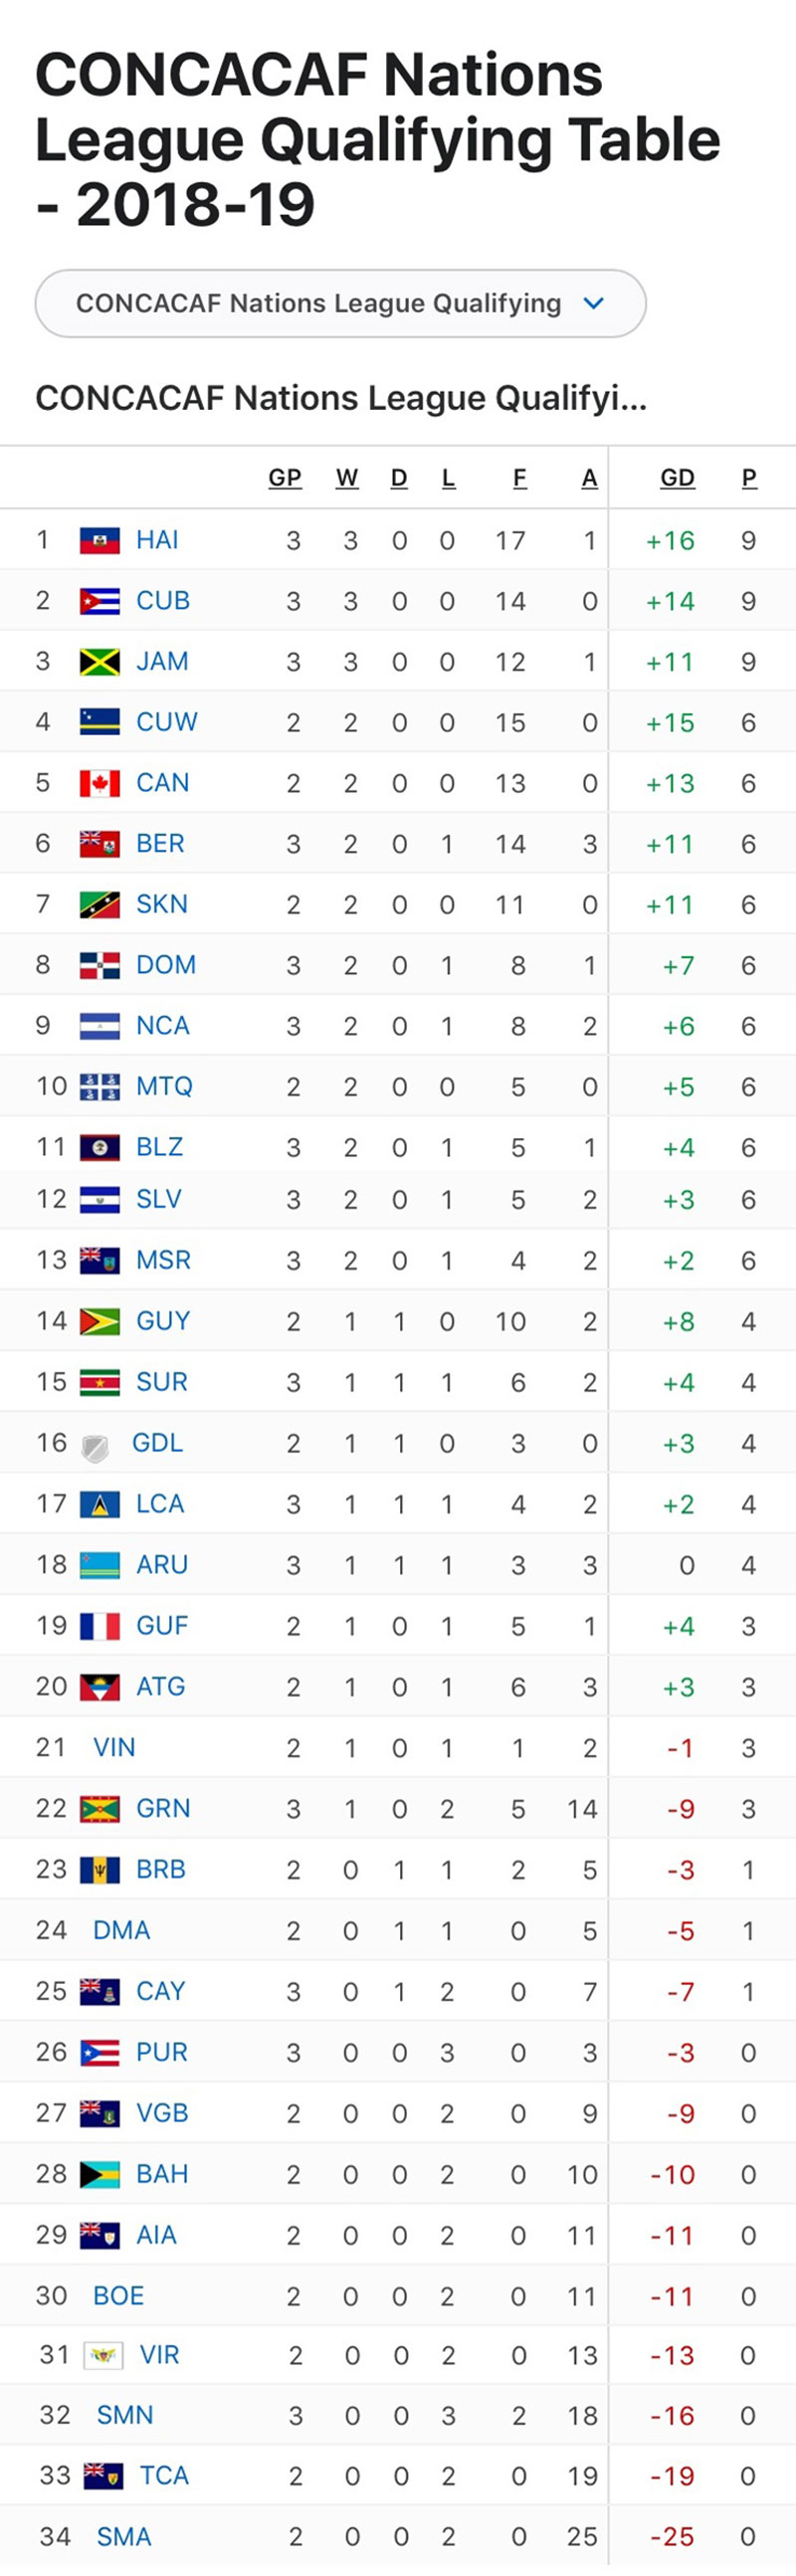 CONCACAF Nations League Qualifying Table 2018-2019 01